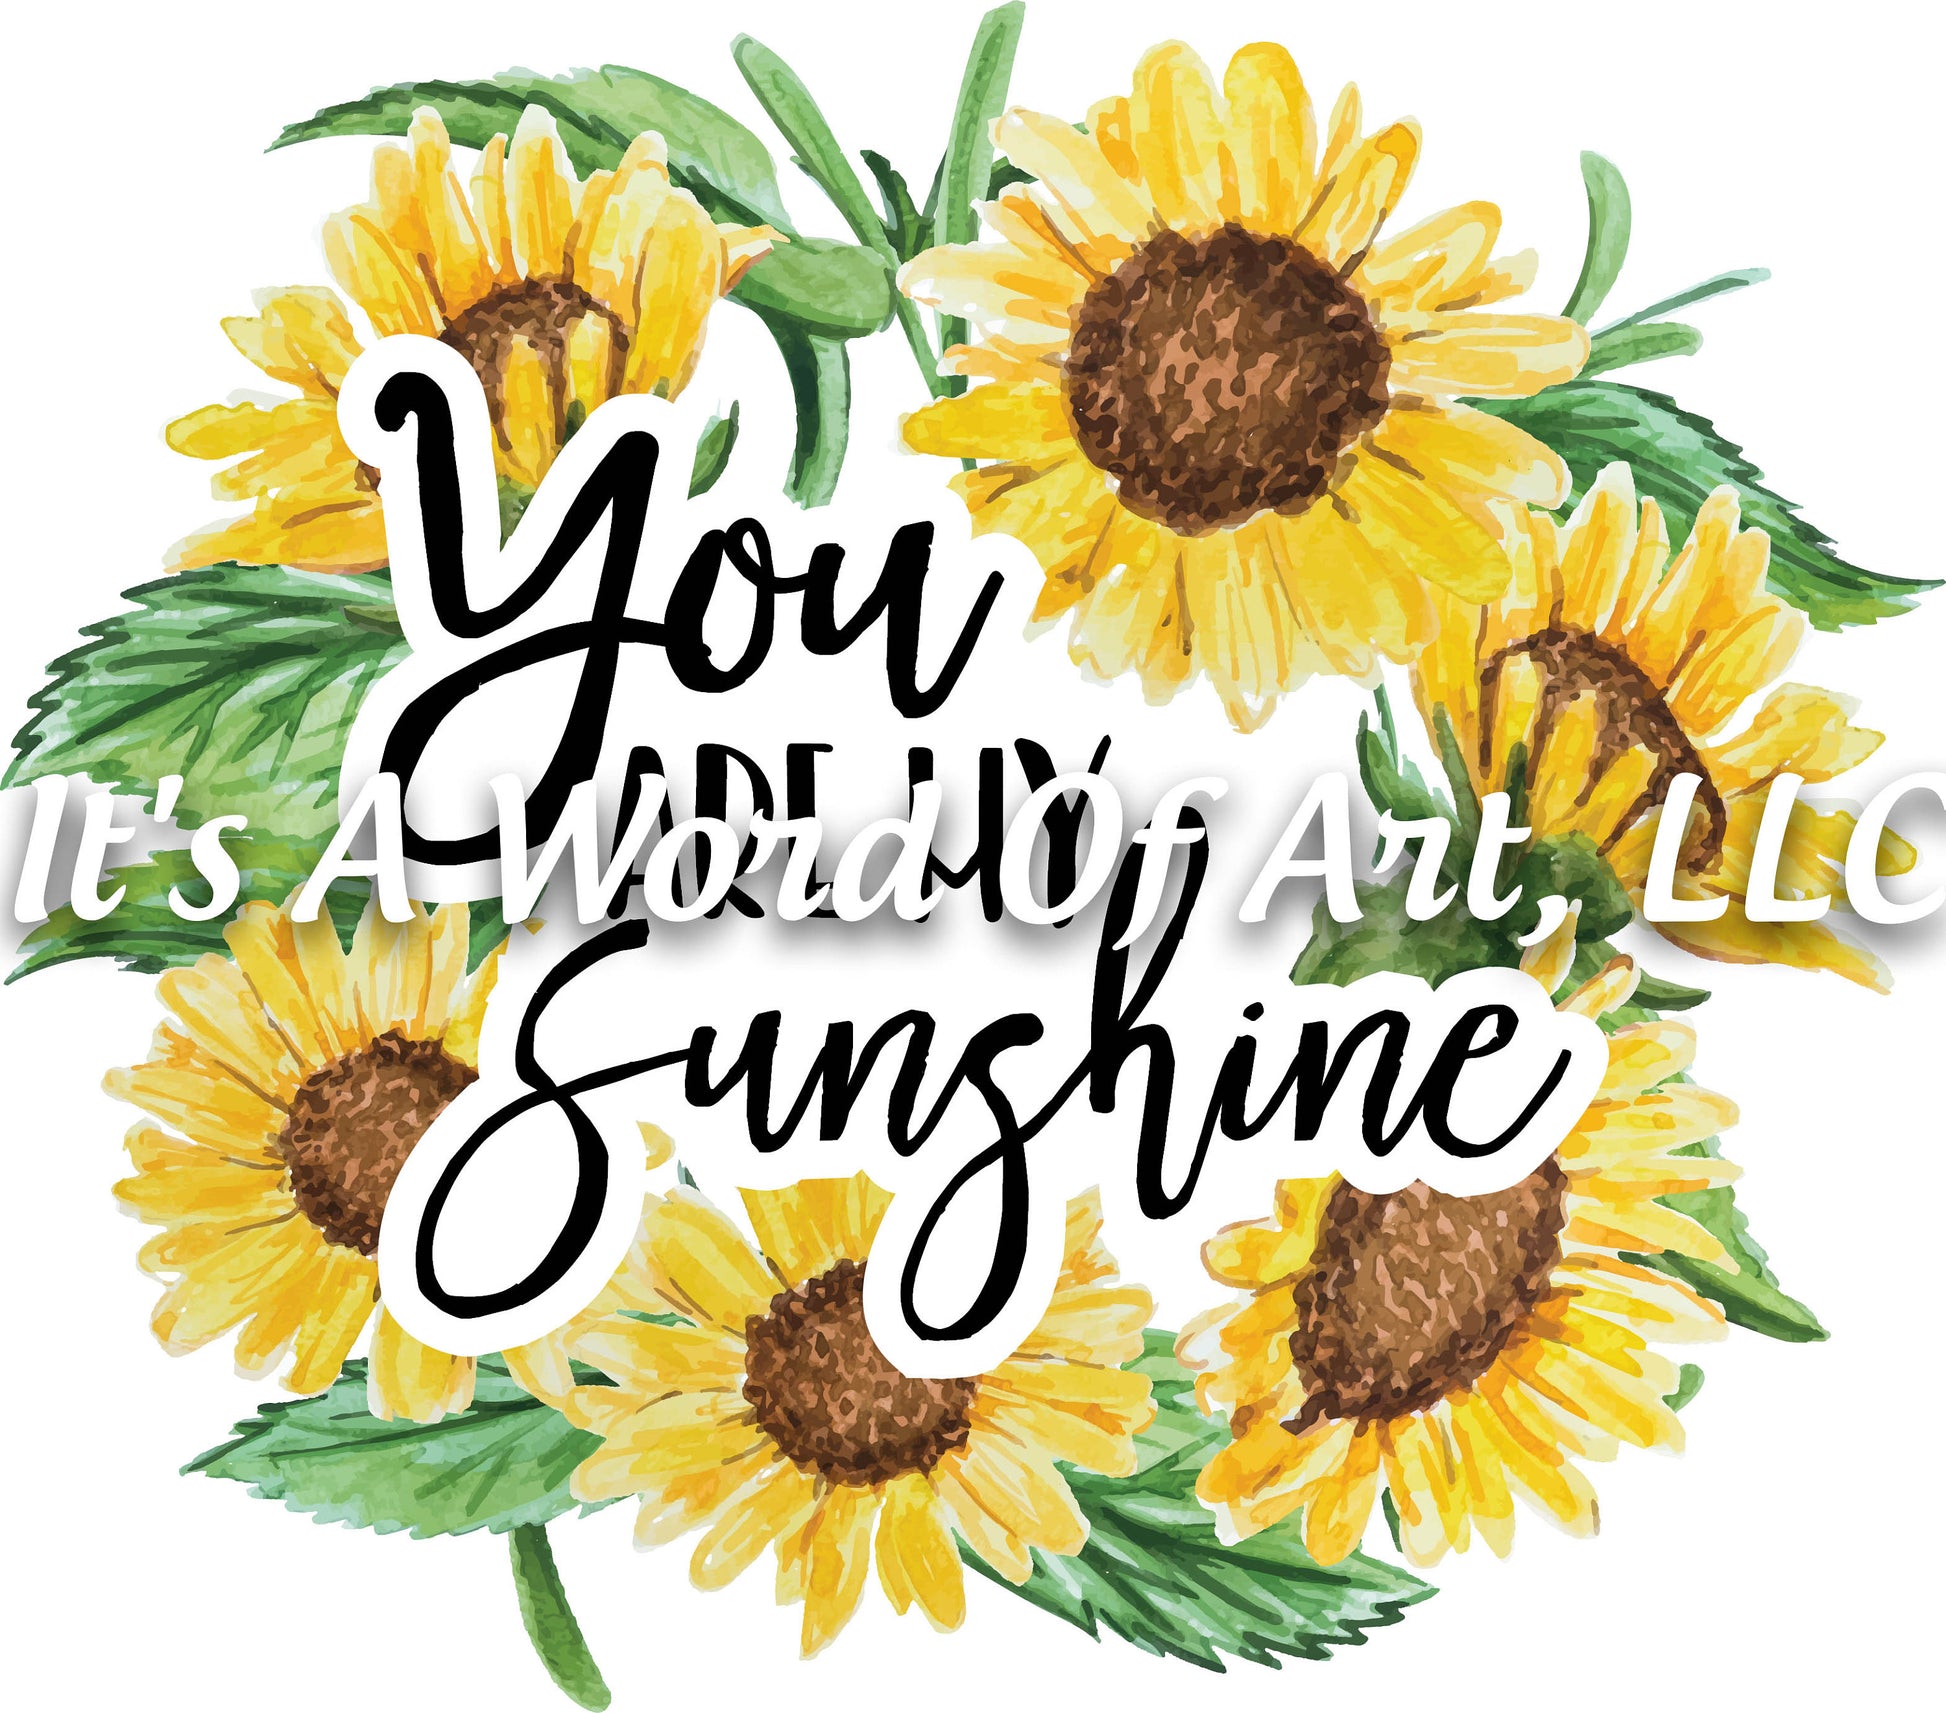 Sunflower 15 - You are my Sunshine Sunflower Sublimation Transfer Set/Ready To Press Sublimation Transfer/Sublimation Transfer